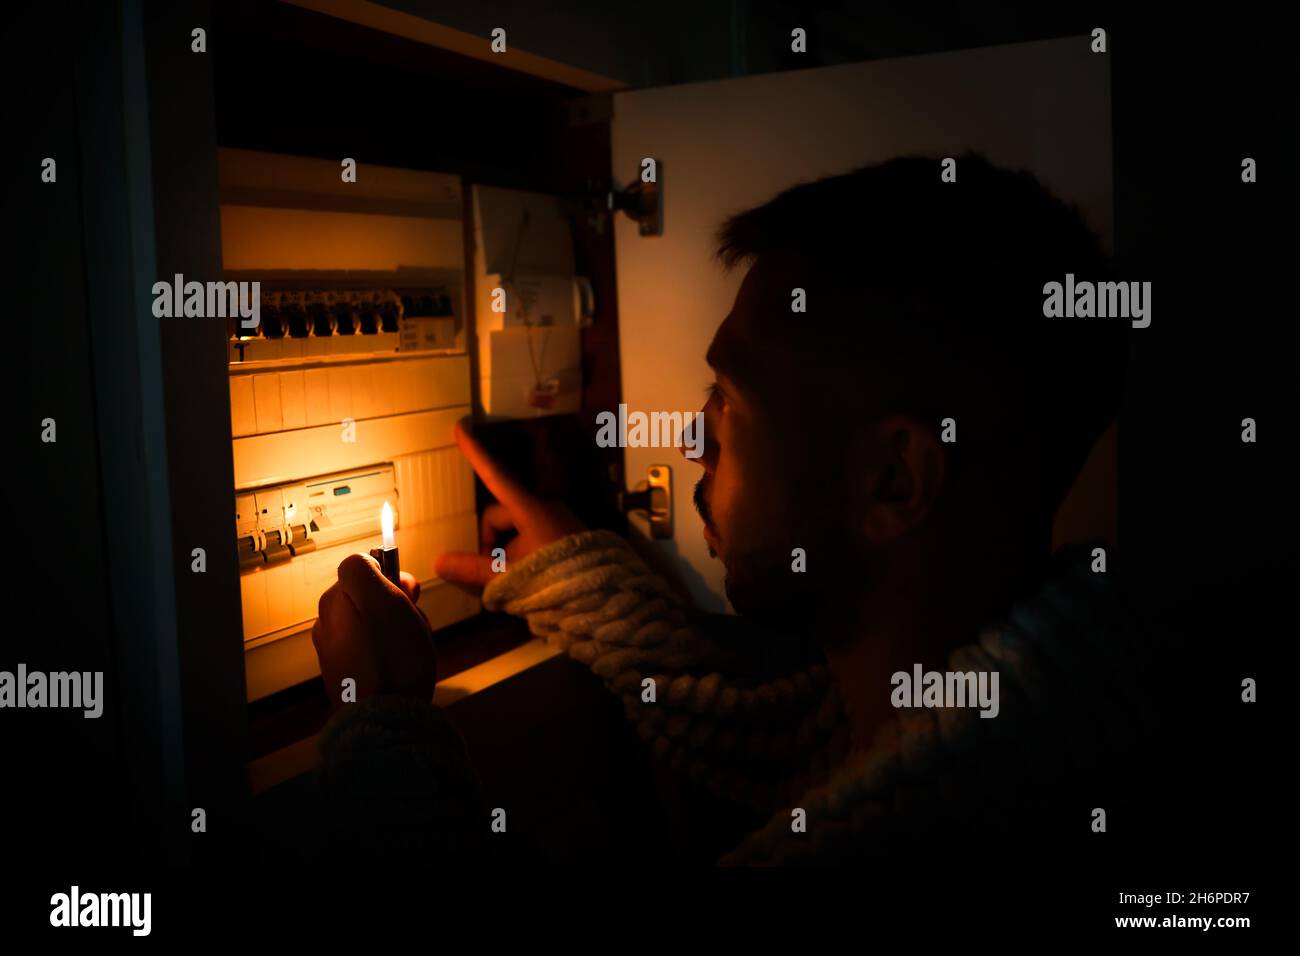 Man with lighter in total darkness investigating fuse box or electric switchboard at home during power outage. Blackout, no electricity concept Stock Photo